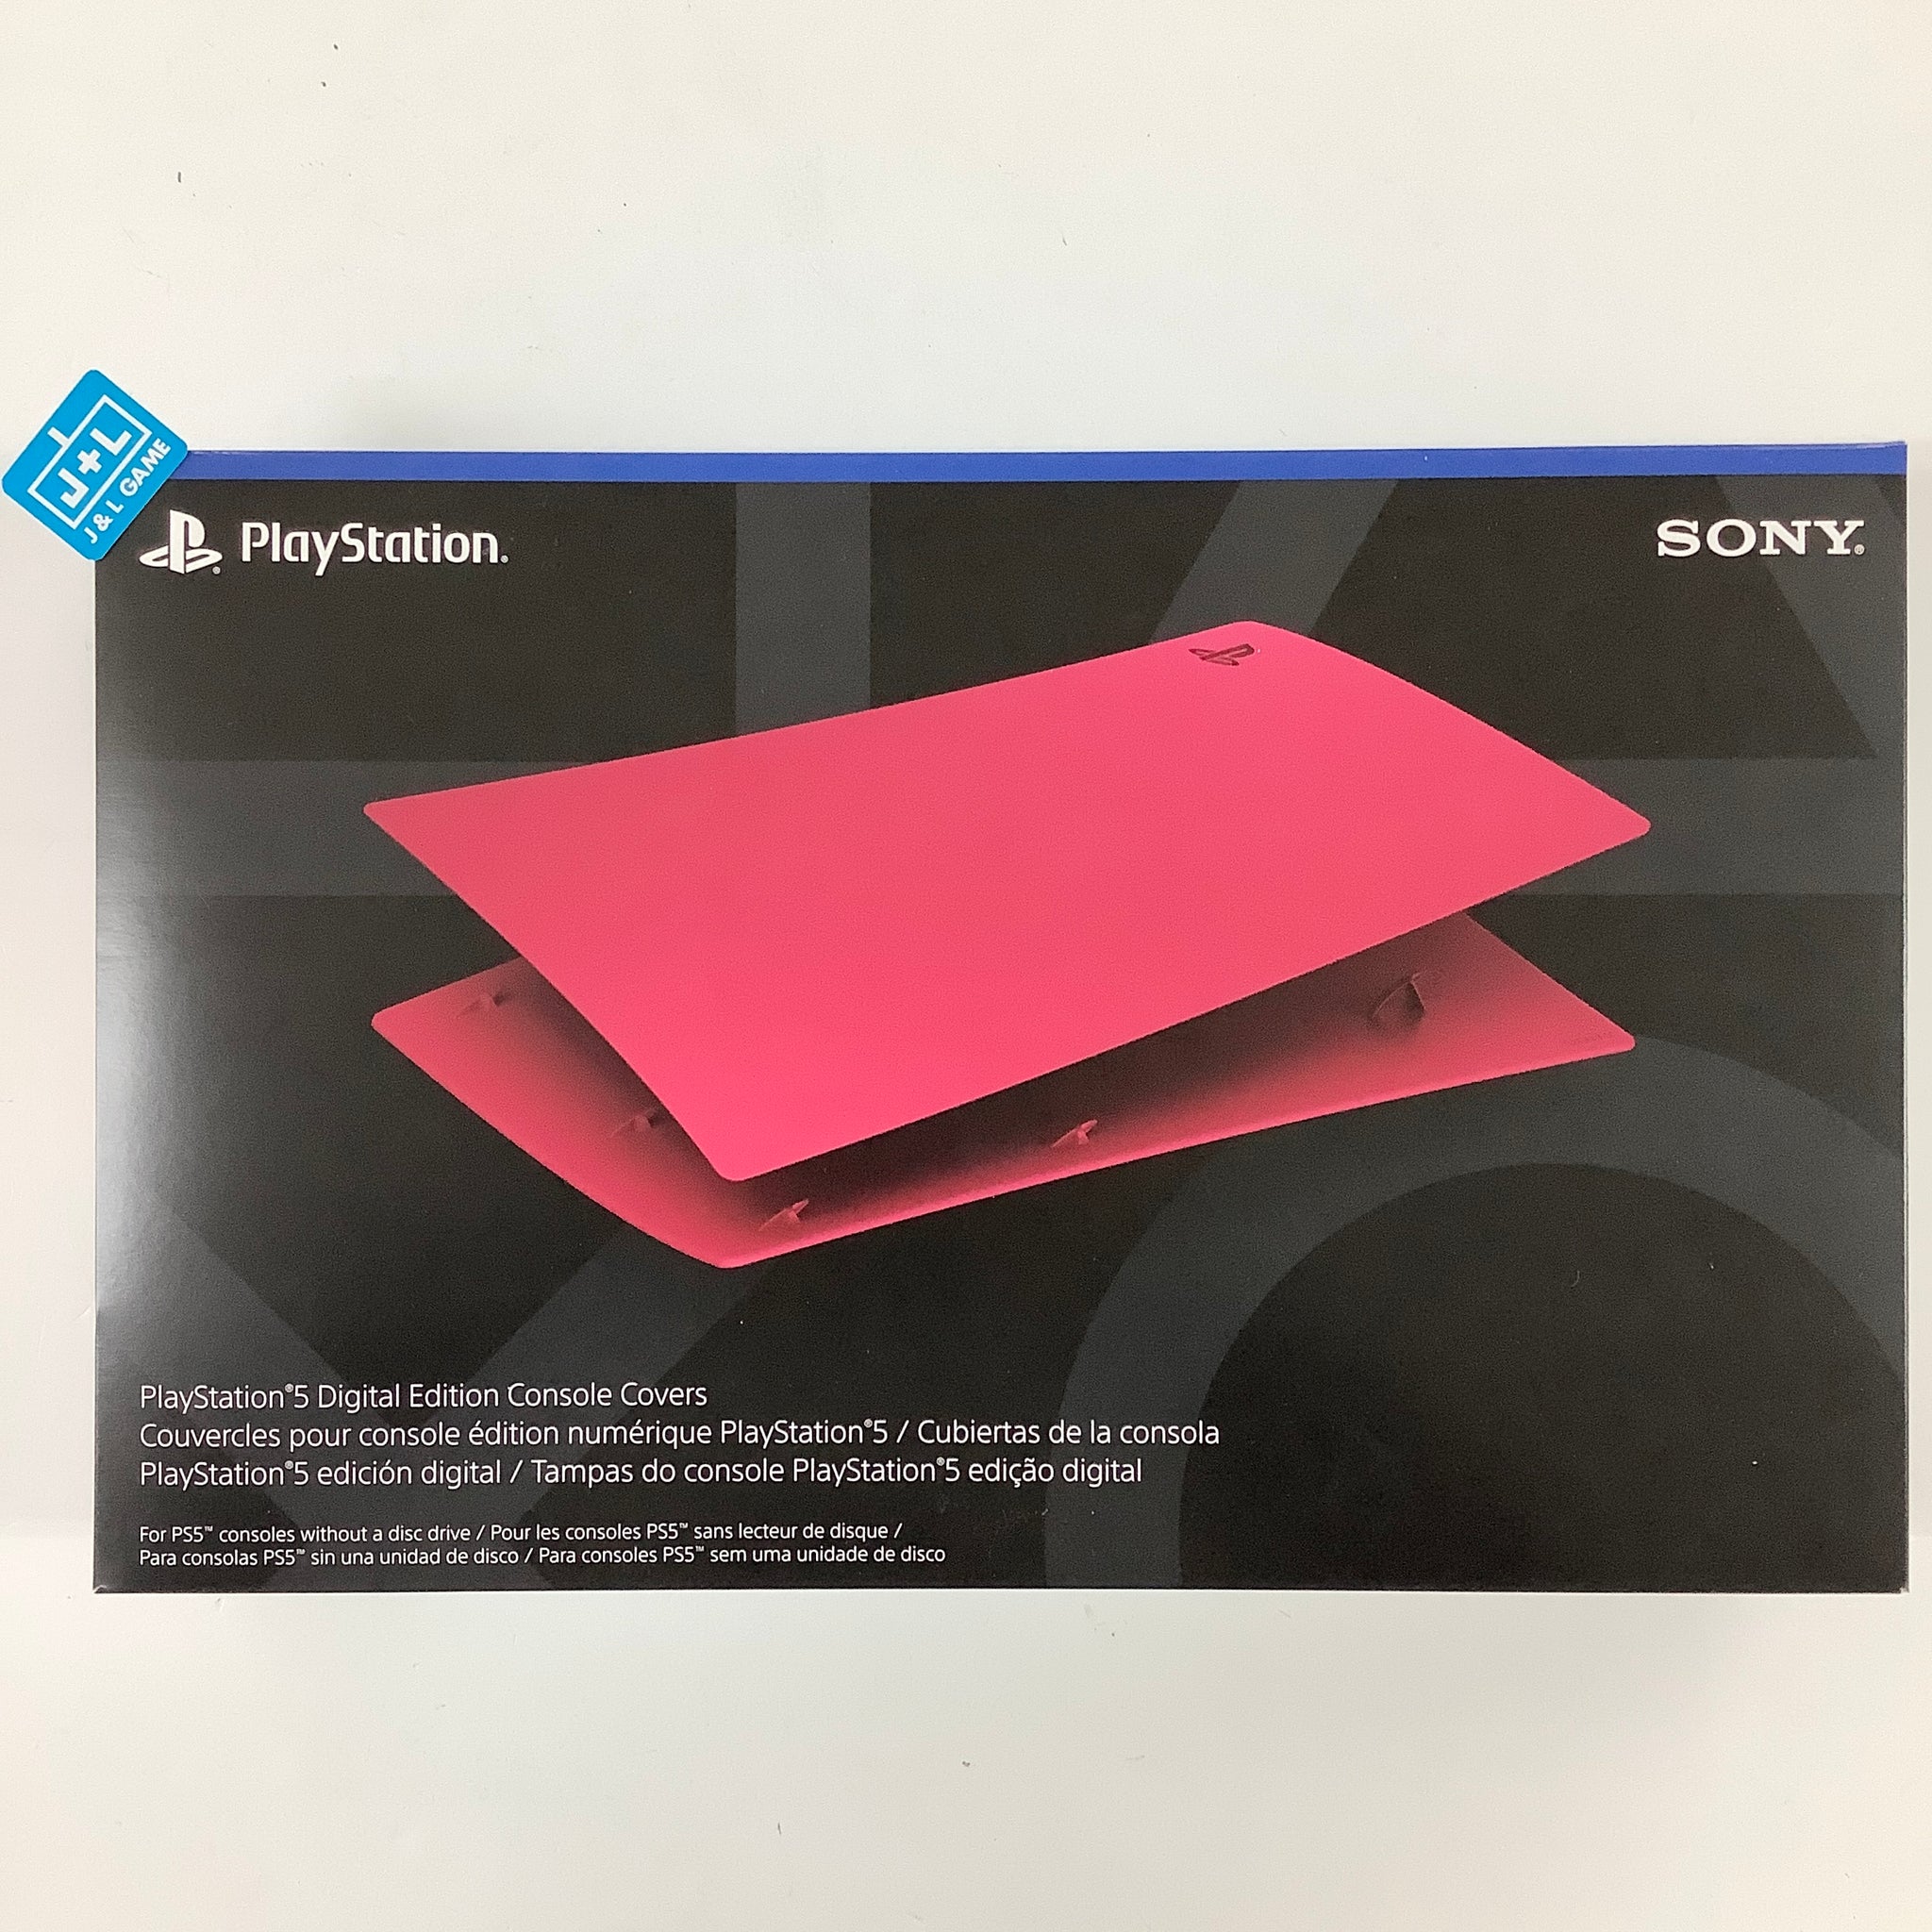 PlayStation 5 console covers  Official PS5 covers made by